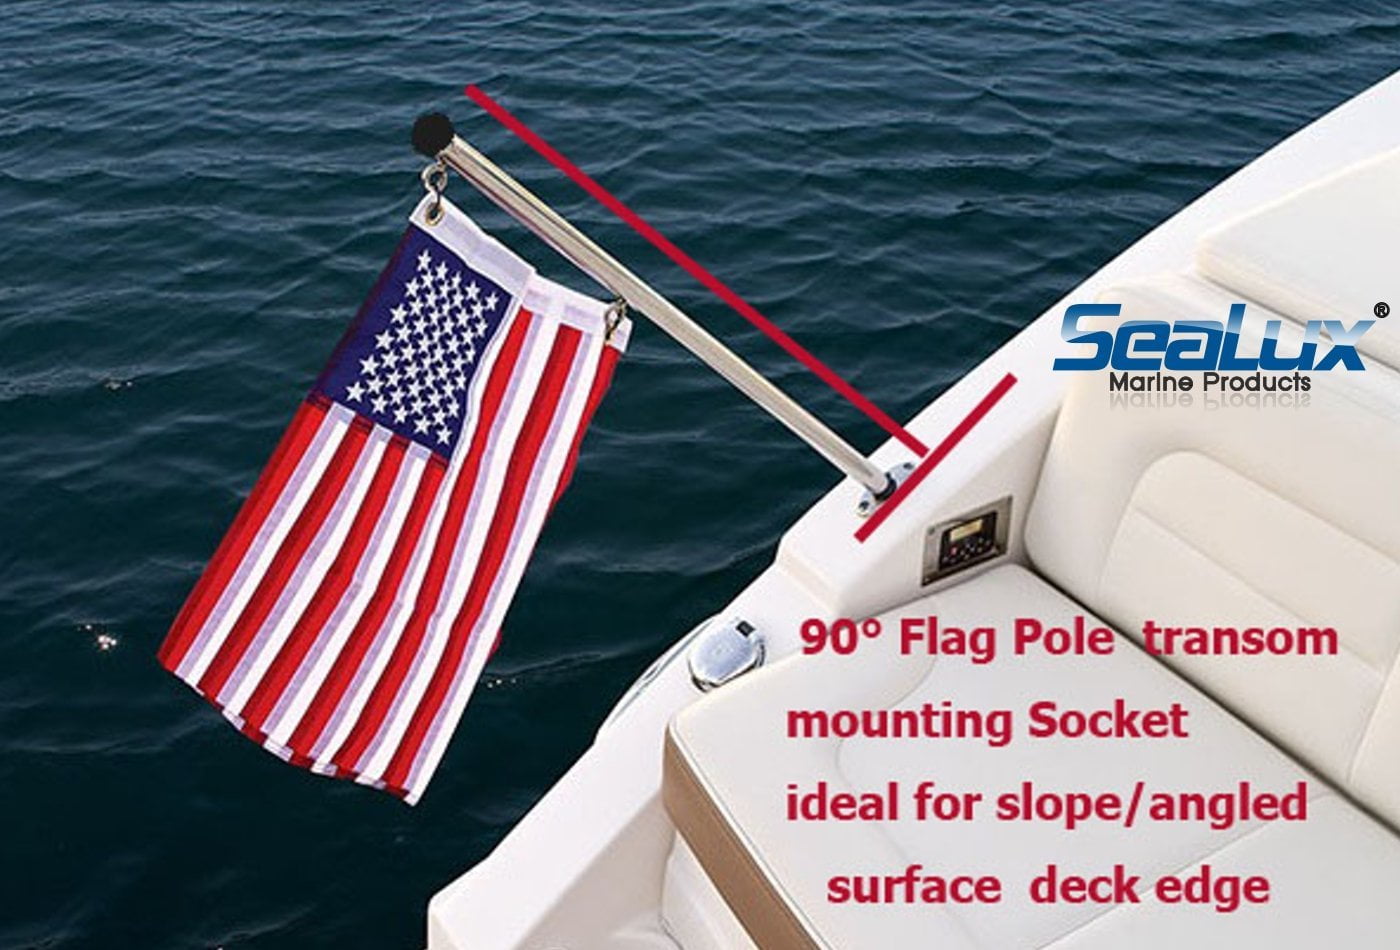 316 Stainless Steel Mirror-Polished Boat 24" Flag Pole with Socket Bas...